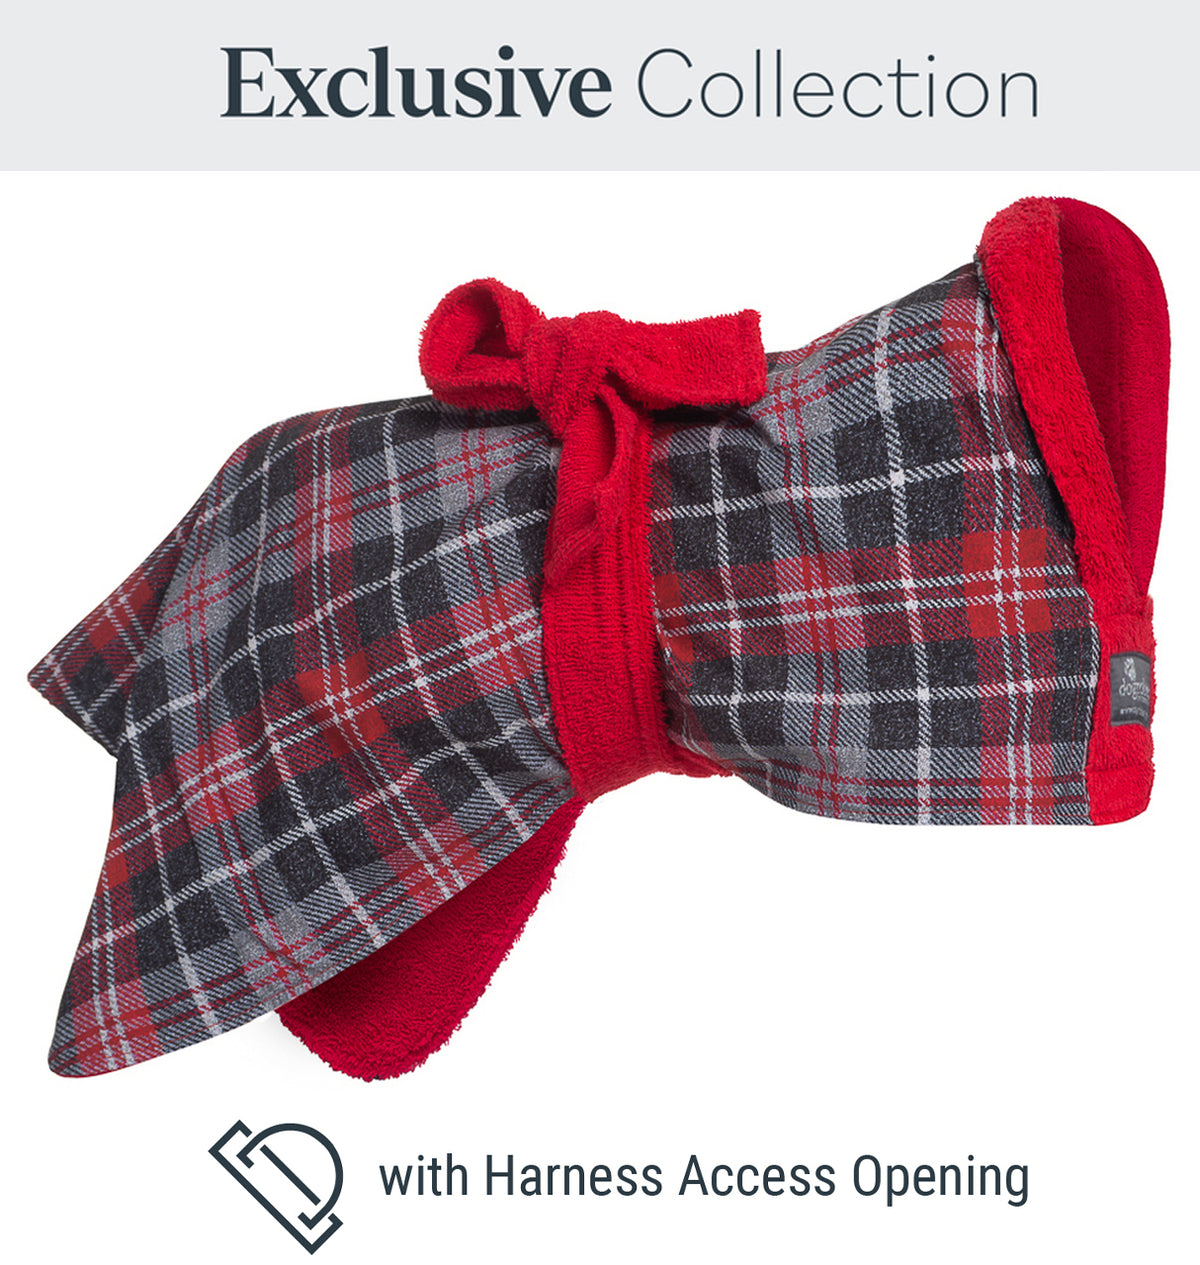 Exclusive collection DogRobe drying coat, with harness access opening in Tartan pattern.